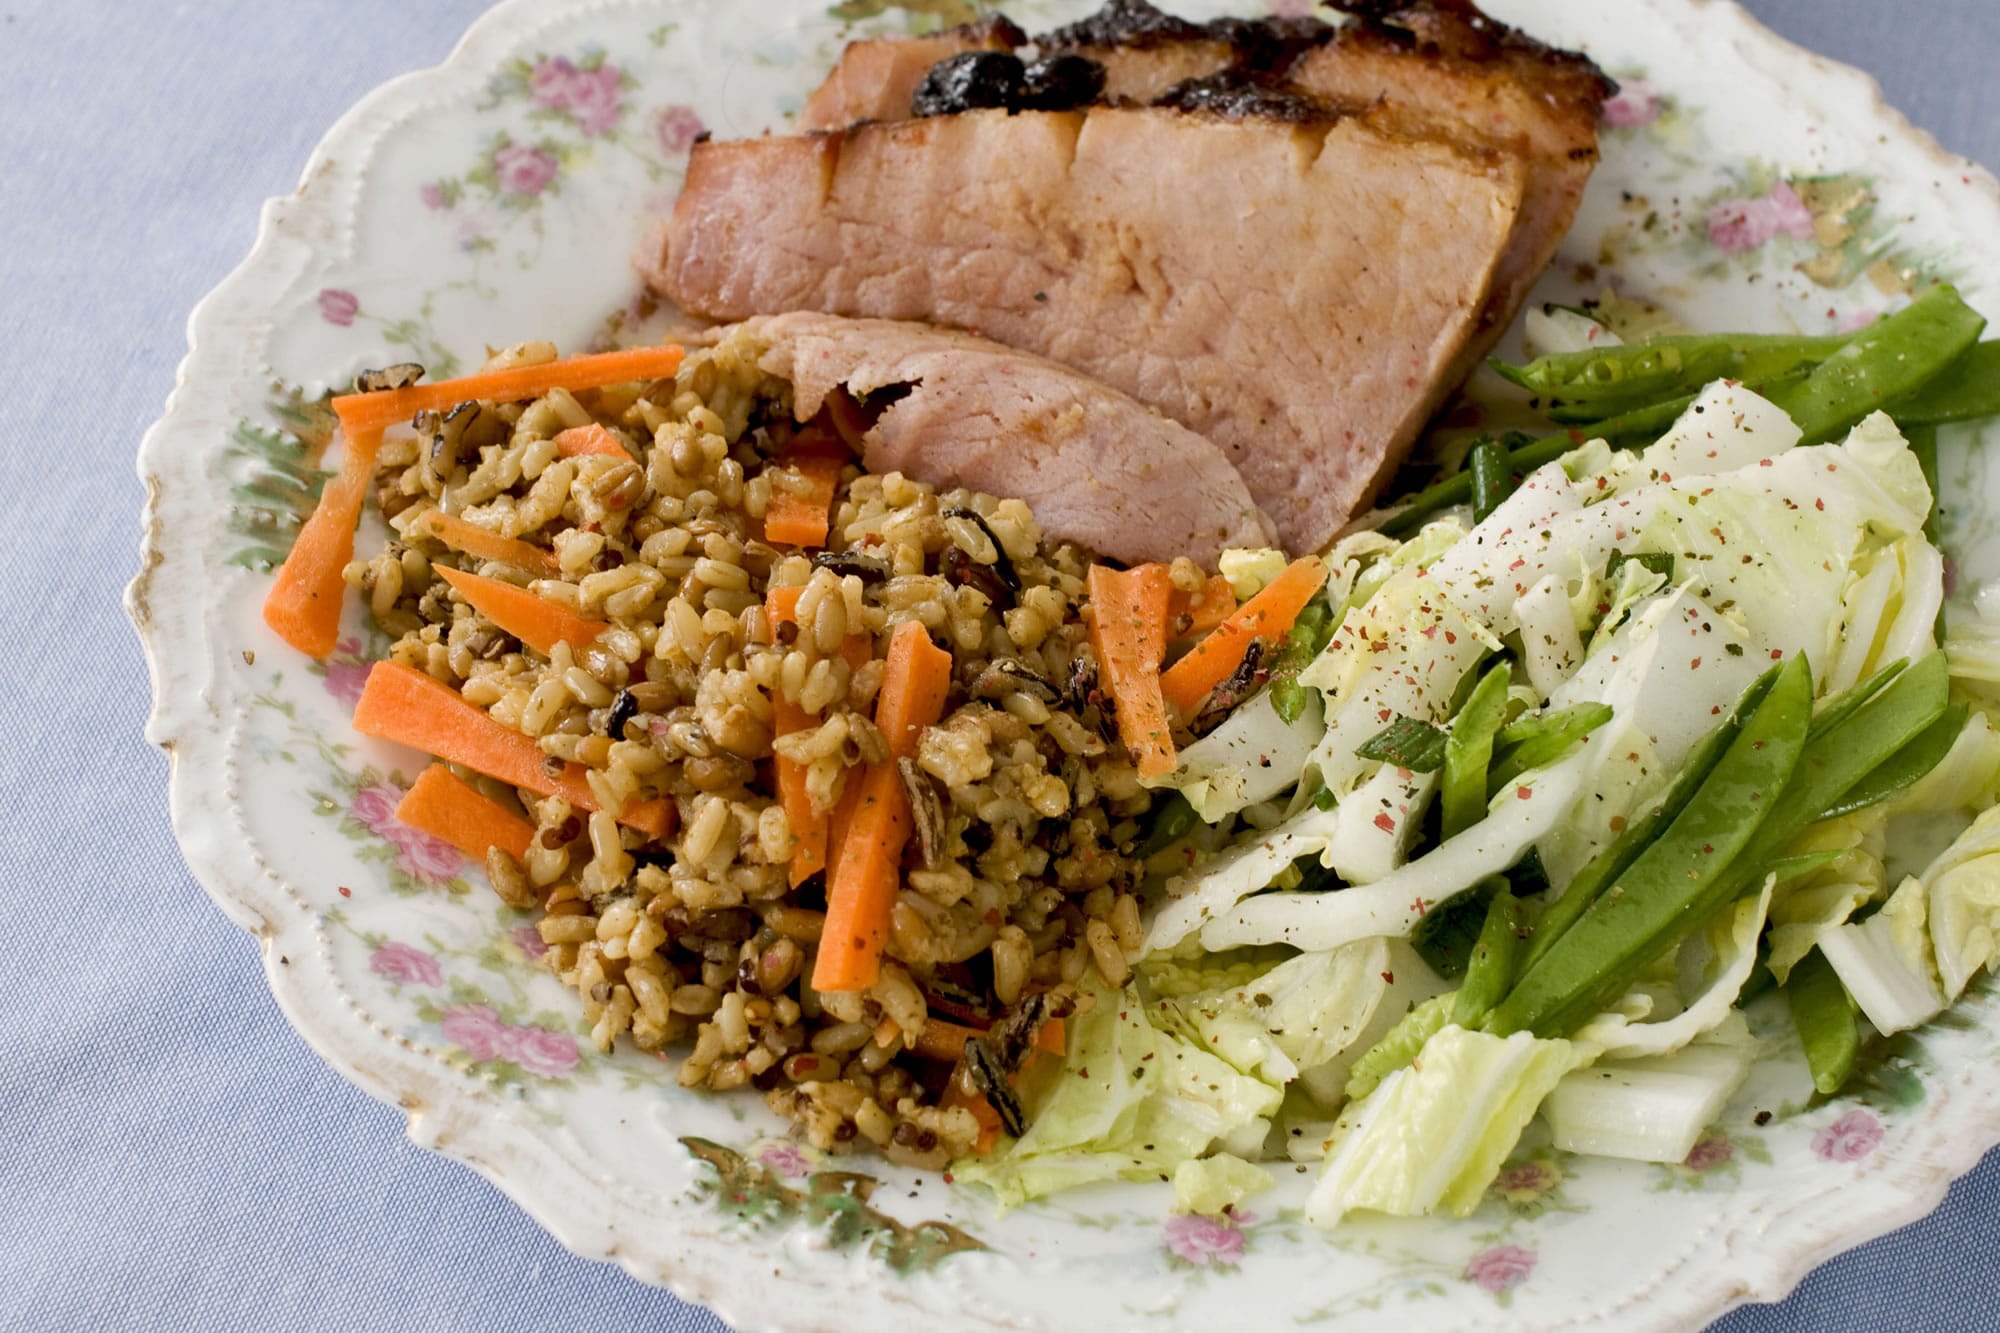 Hoisin-Glazed Ham With Napa Cabbage and Snow Pea Slaw may just please traditionalists and the adventurous.